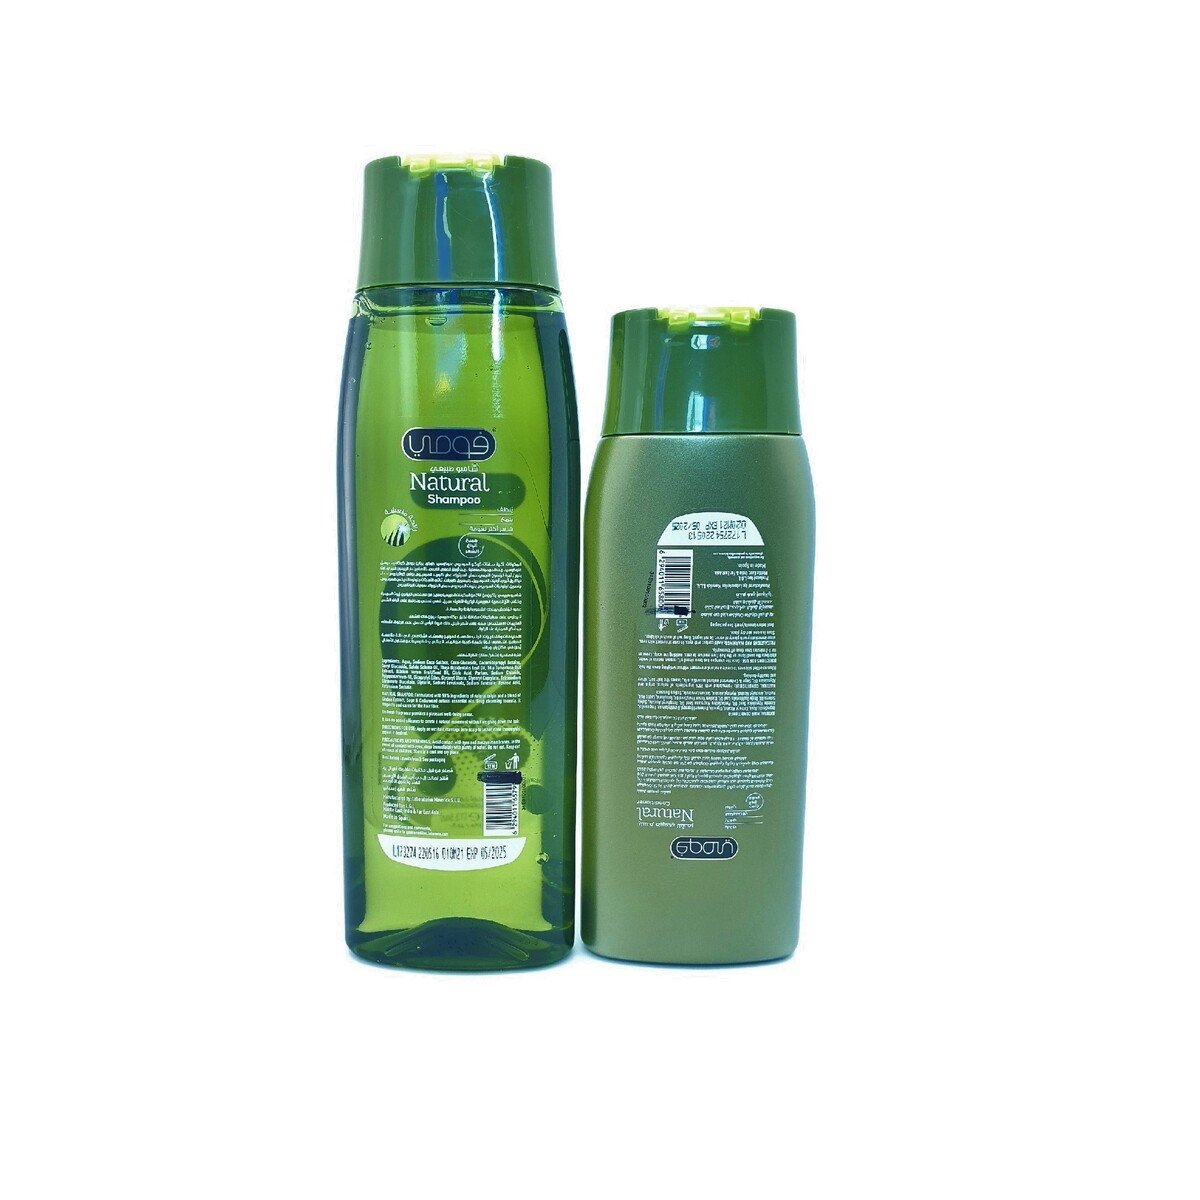 Fomme Natural Shampoo 400ml + Fomme Natural Conditioner 300 ml